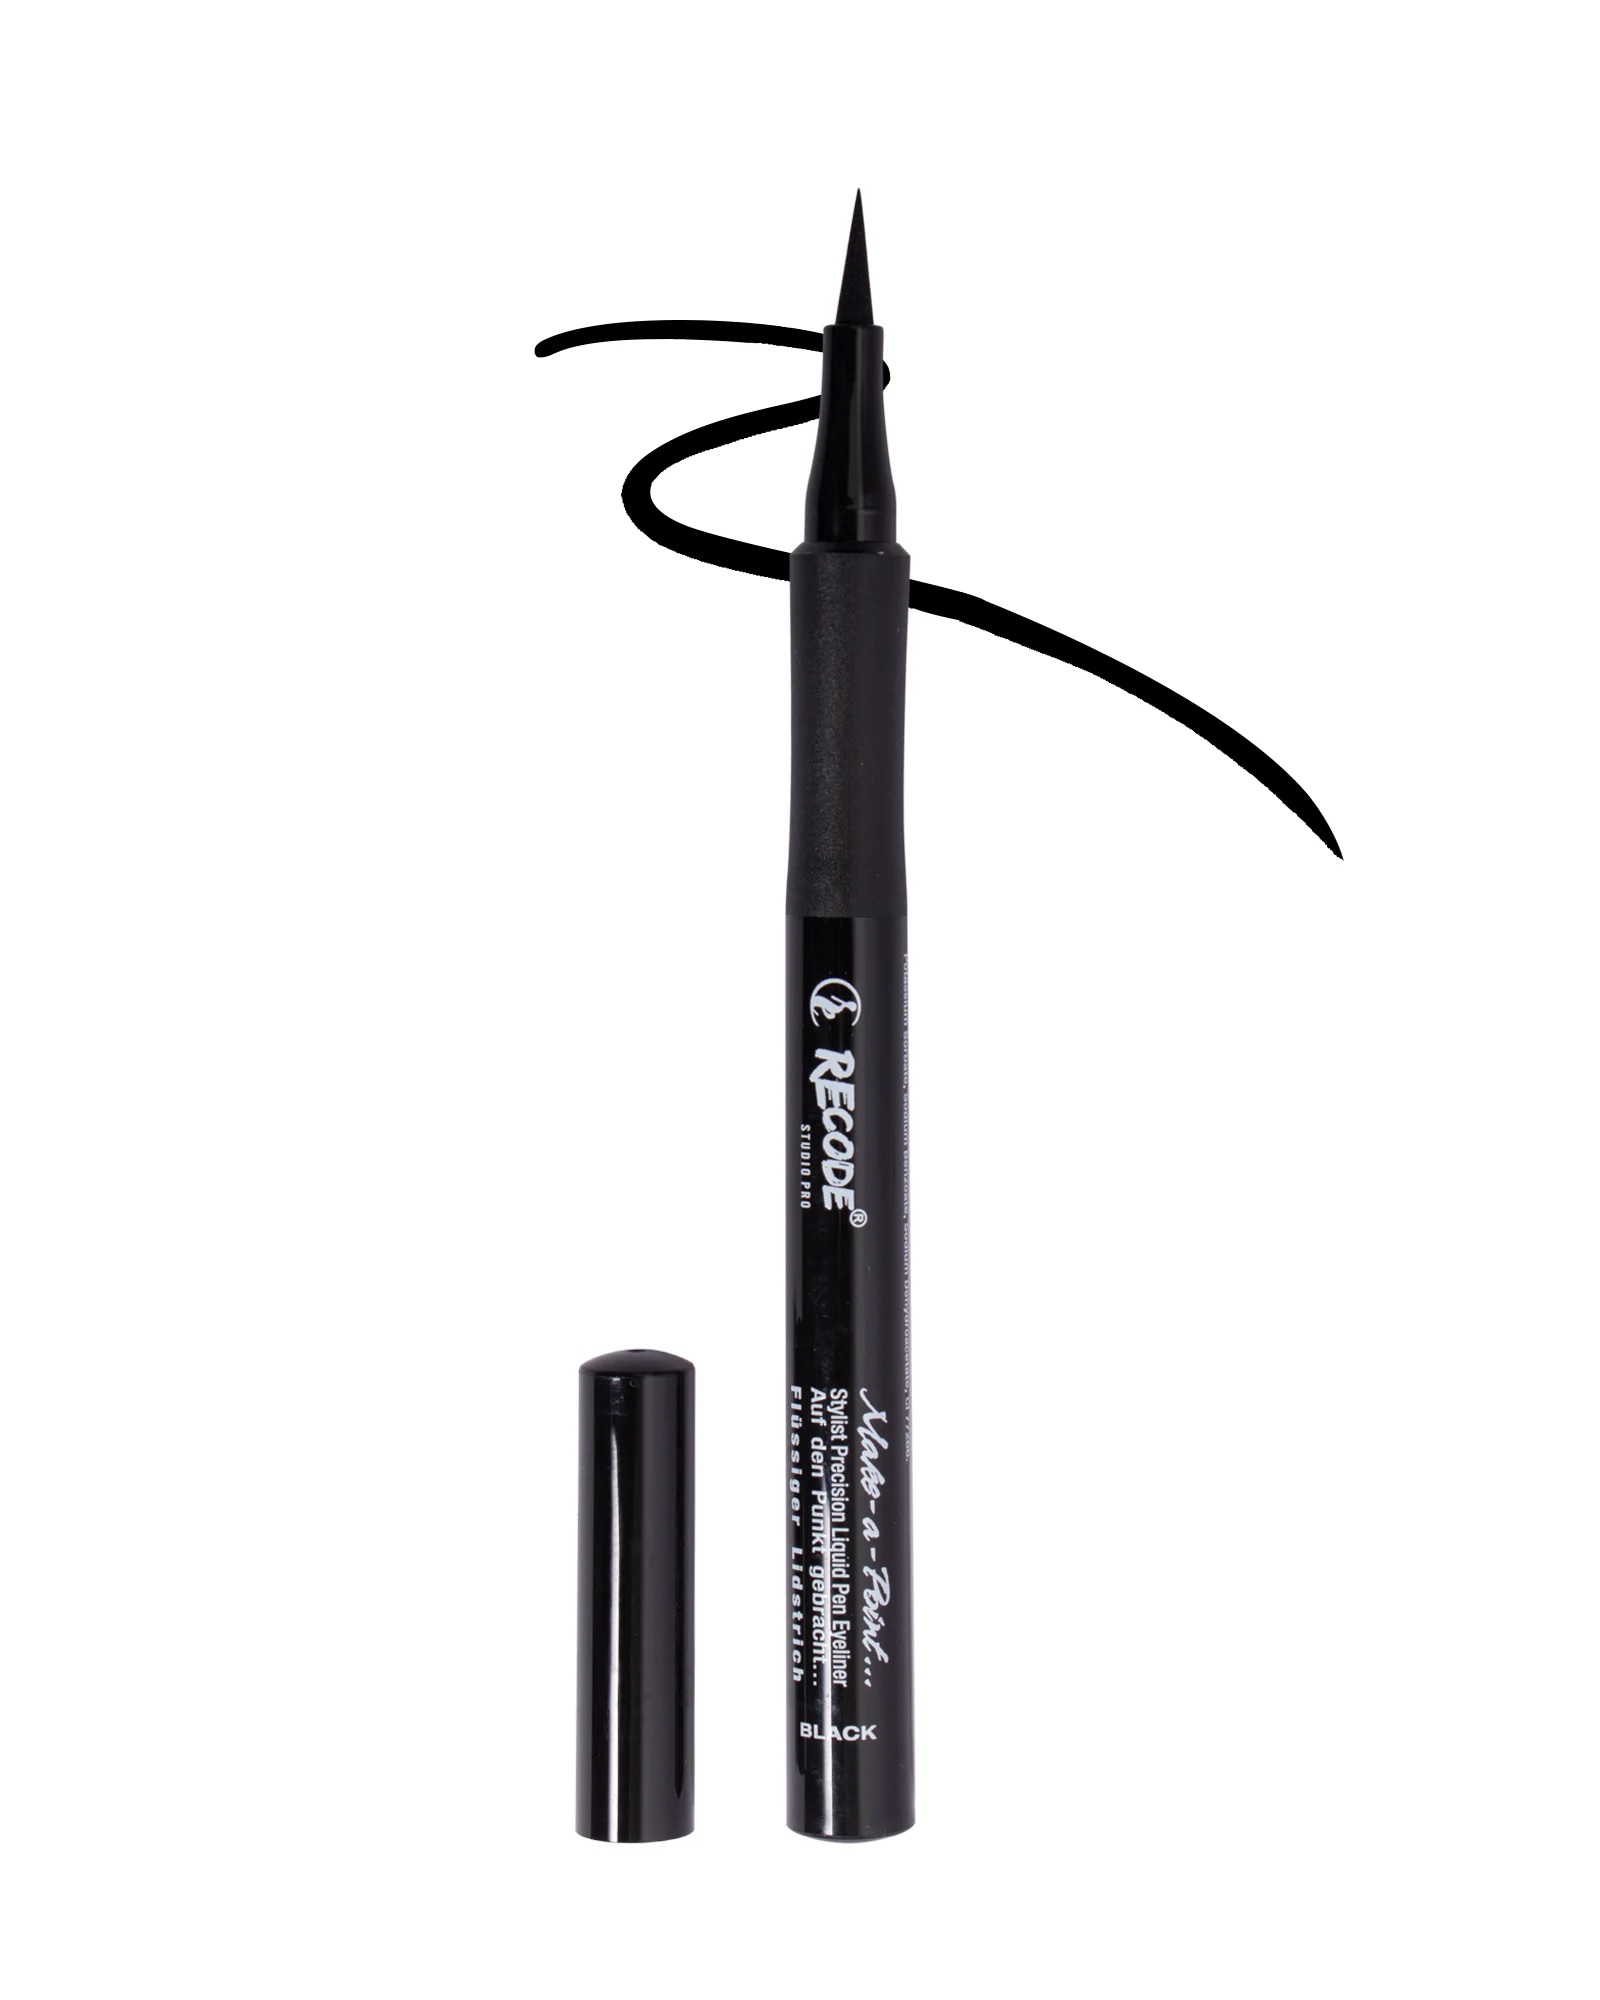 What Are the Best Tips for Applying Sketch Eyeliner Like a Pro?